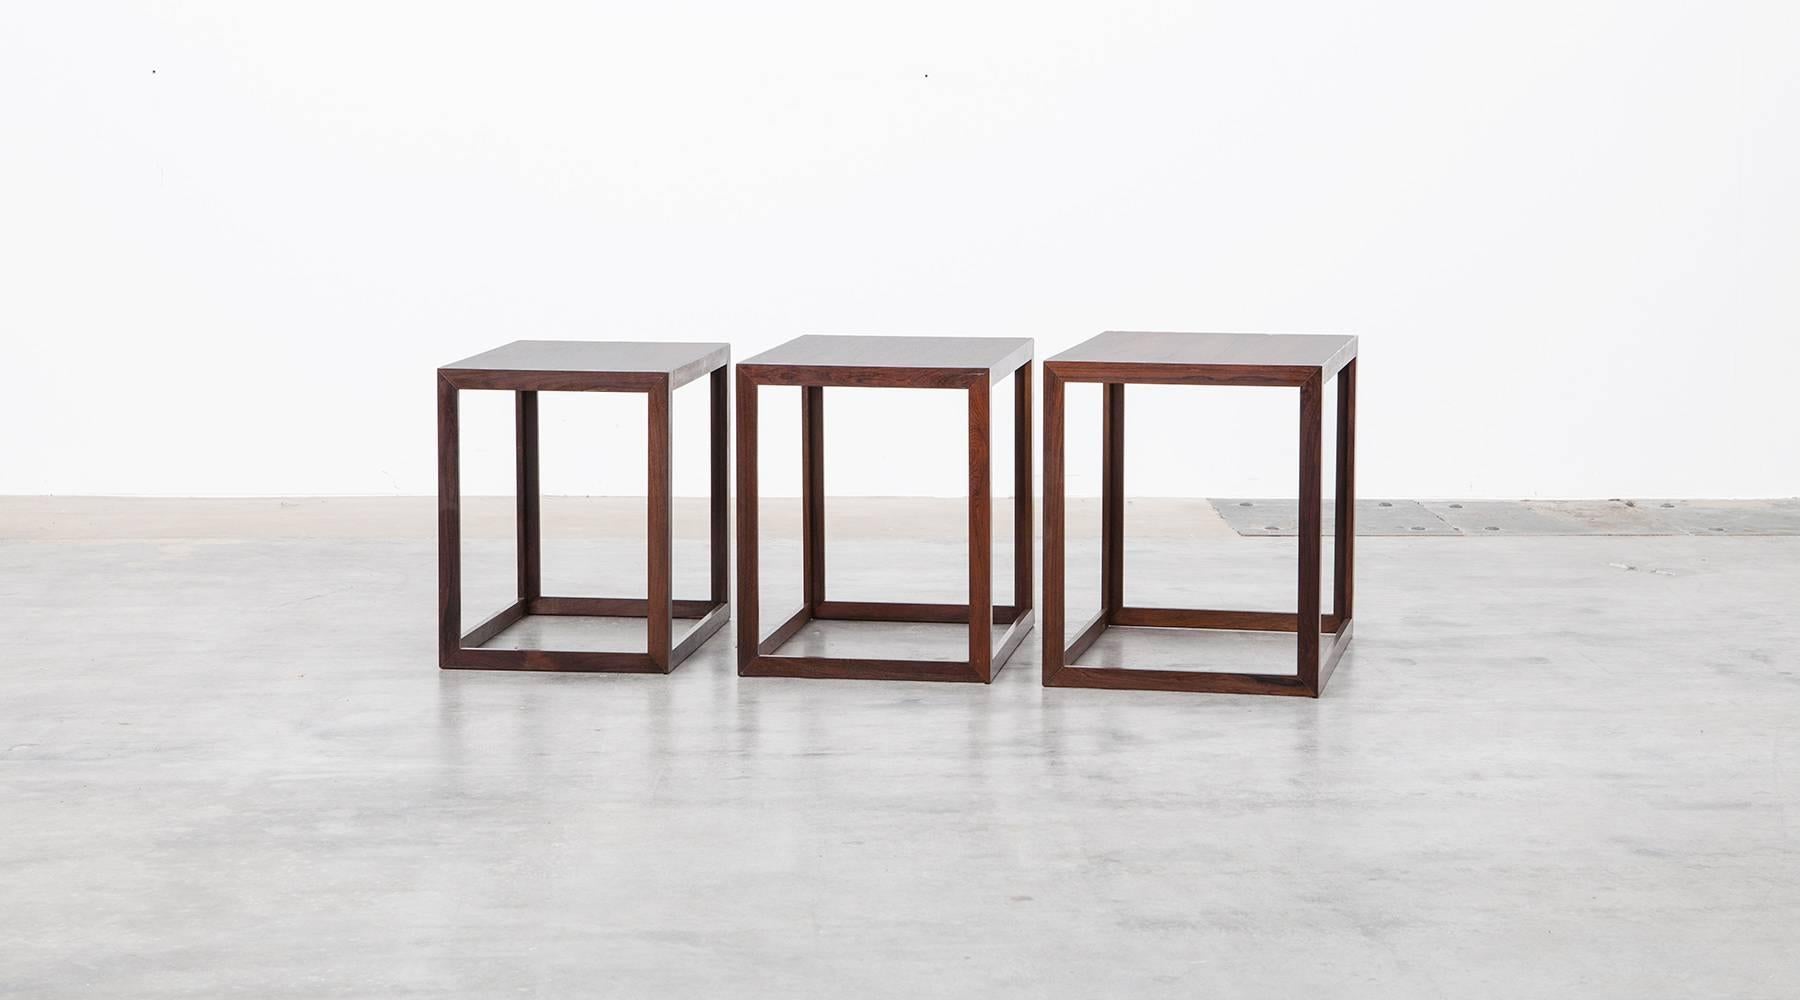 Elegant set of three nesting tables in the style of Børge Mogensen design. Each table has a rectangular top and even if there are differences in color shades and texture, the tables fits perfectly together. The wood is beautiful warm and shows a